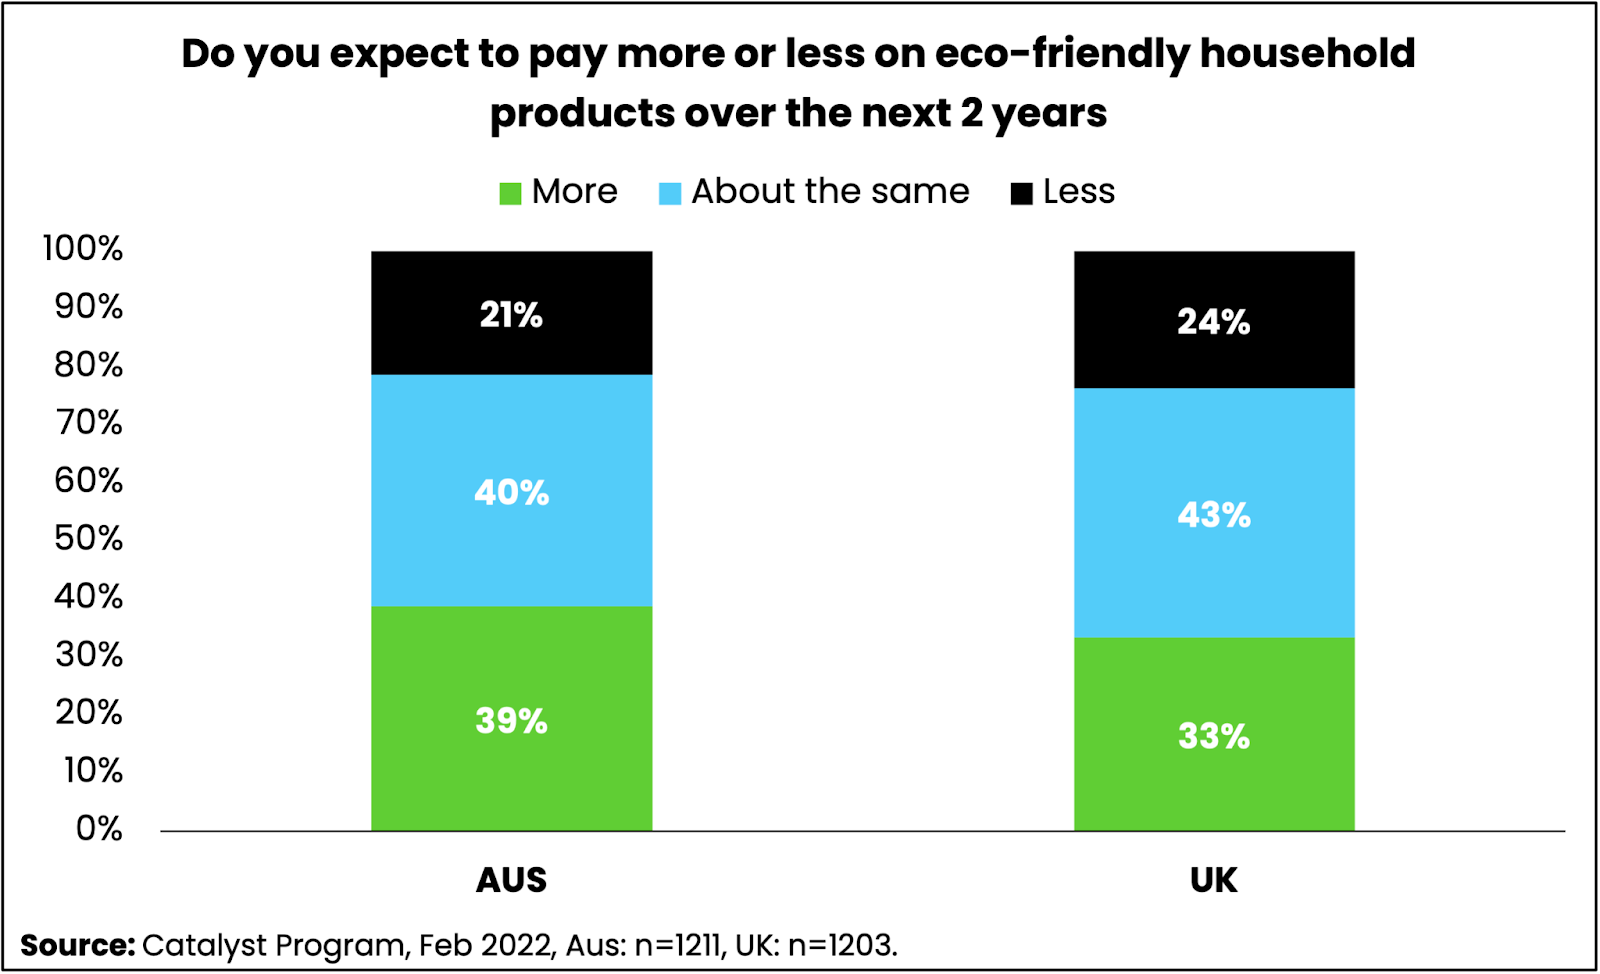 Consumer willingness to pay more for eco-friendly household products